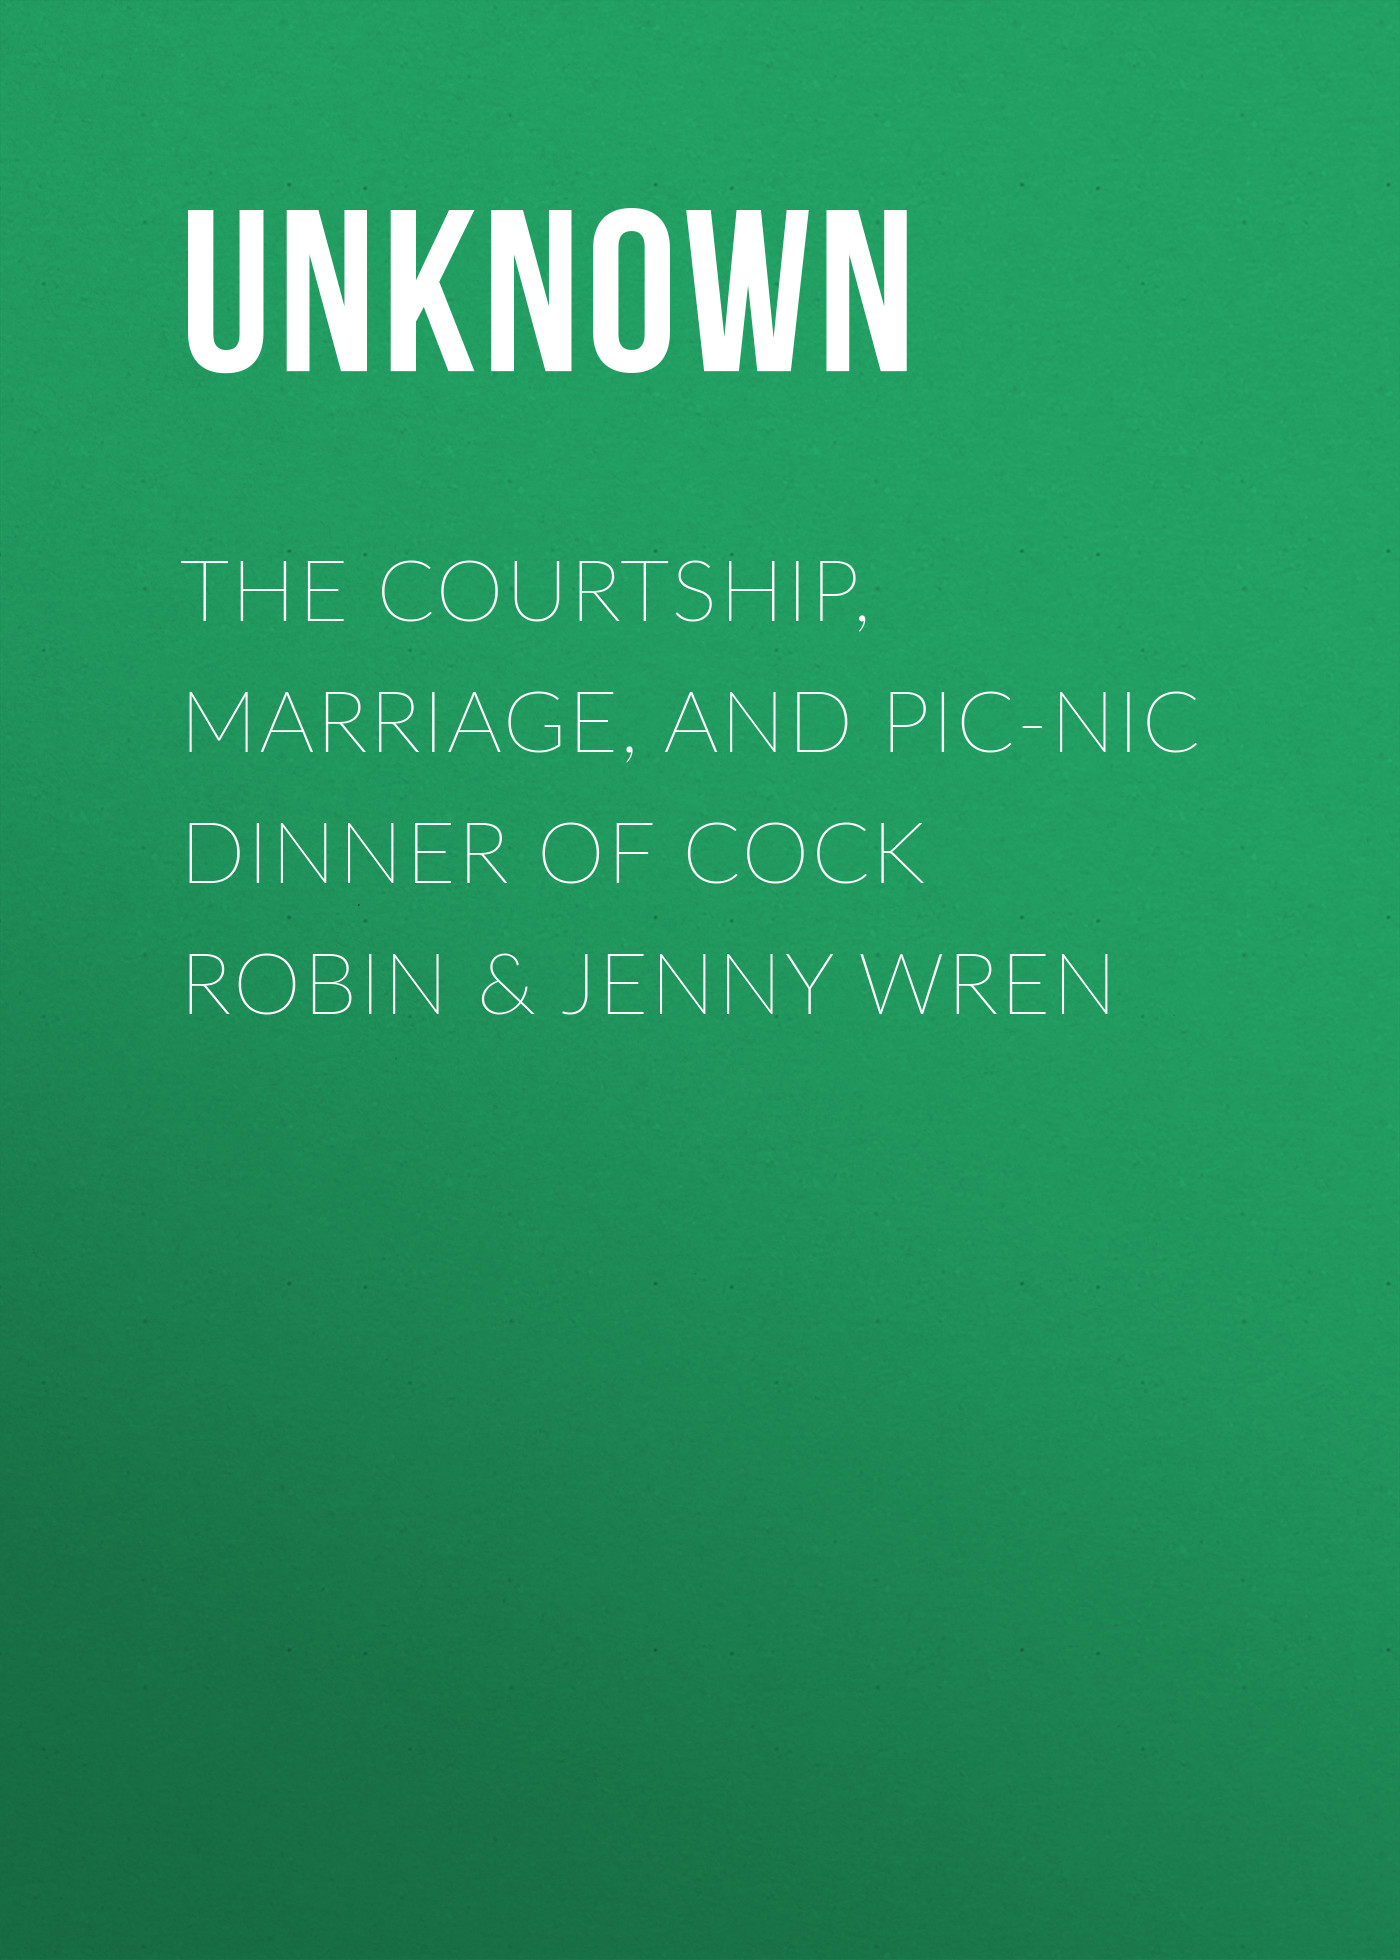 The Courtship, Marriage, and Pic-Nic Dinner of Cock Robin&Jenny Wren